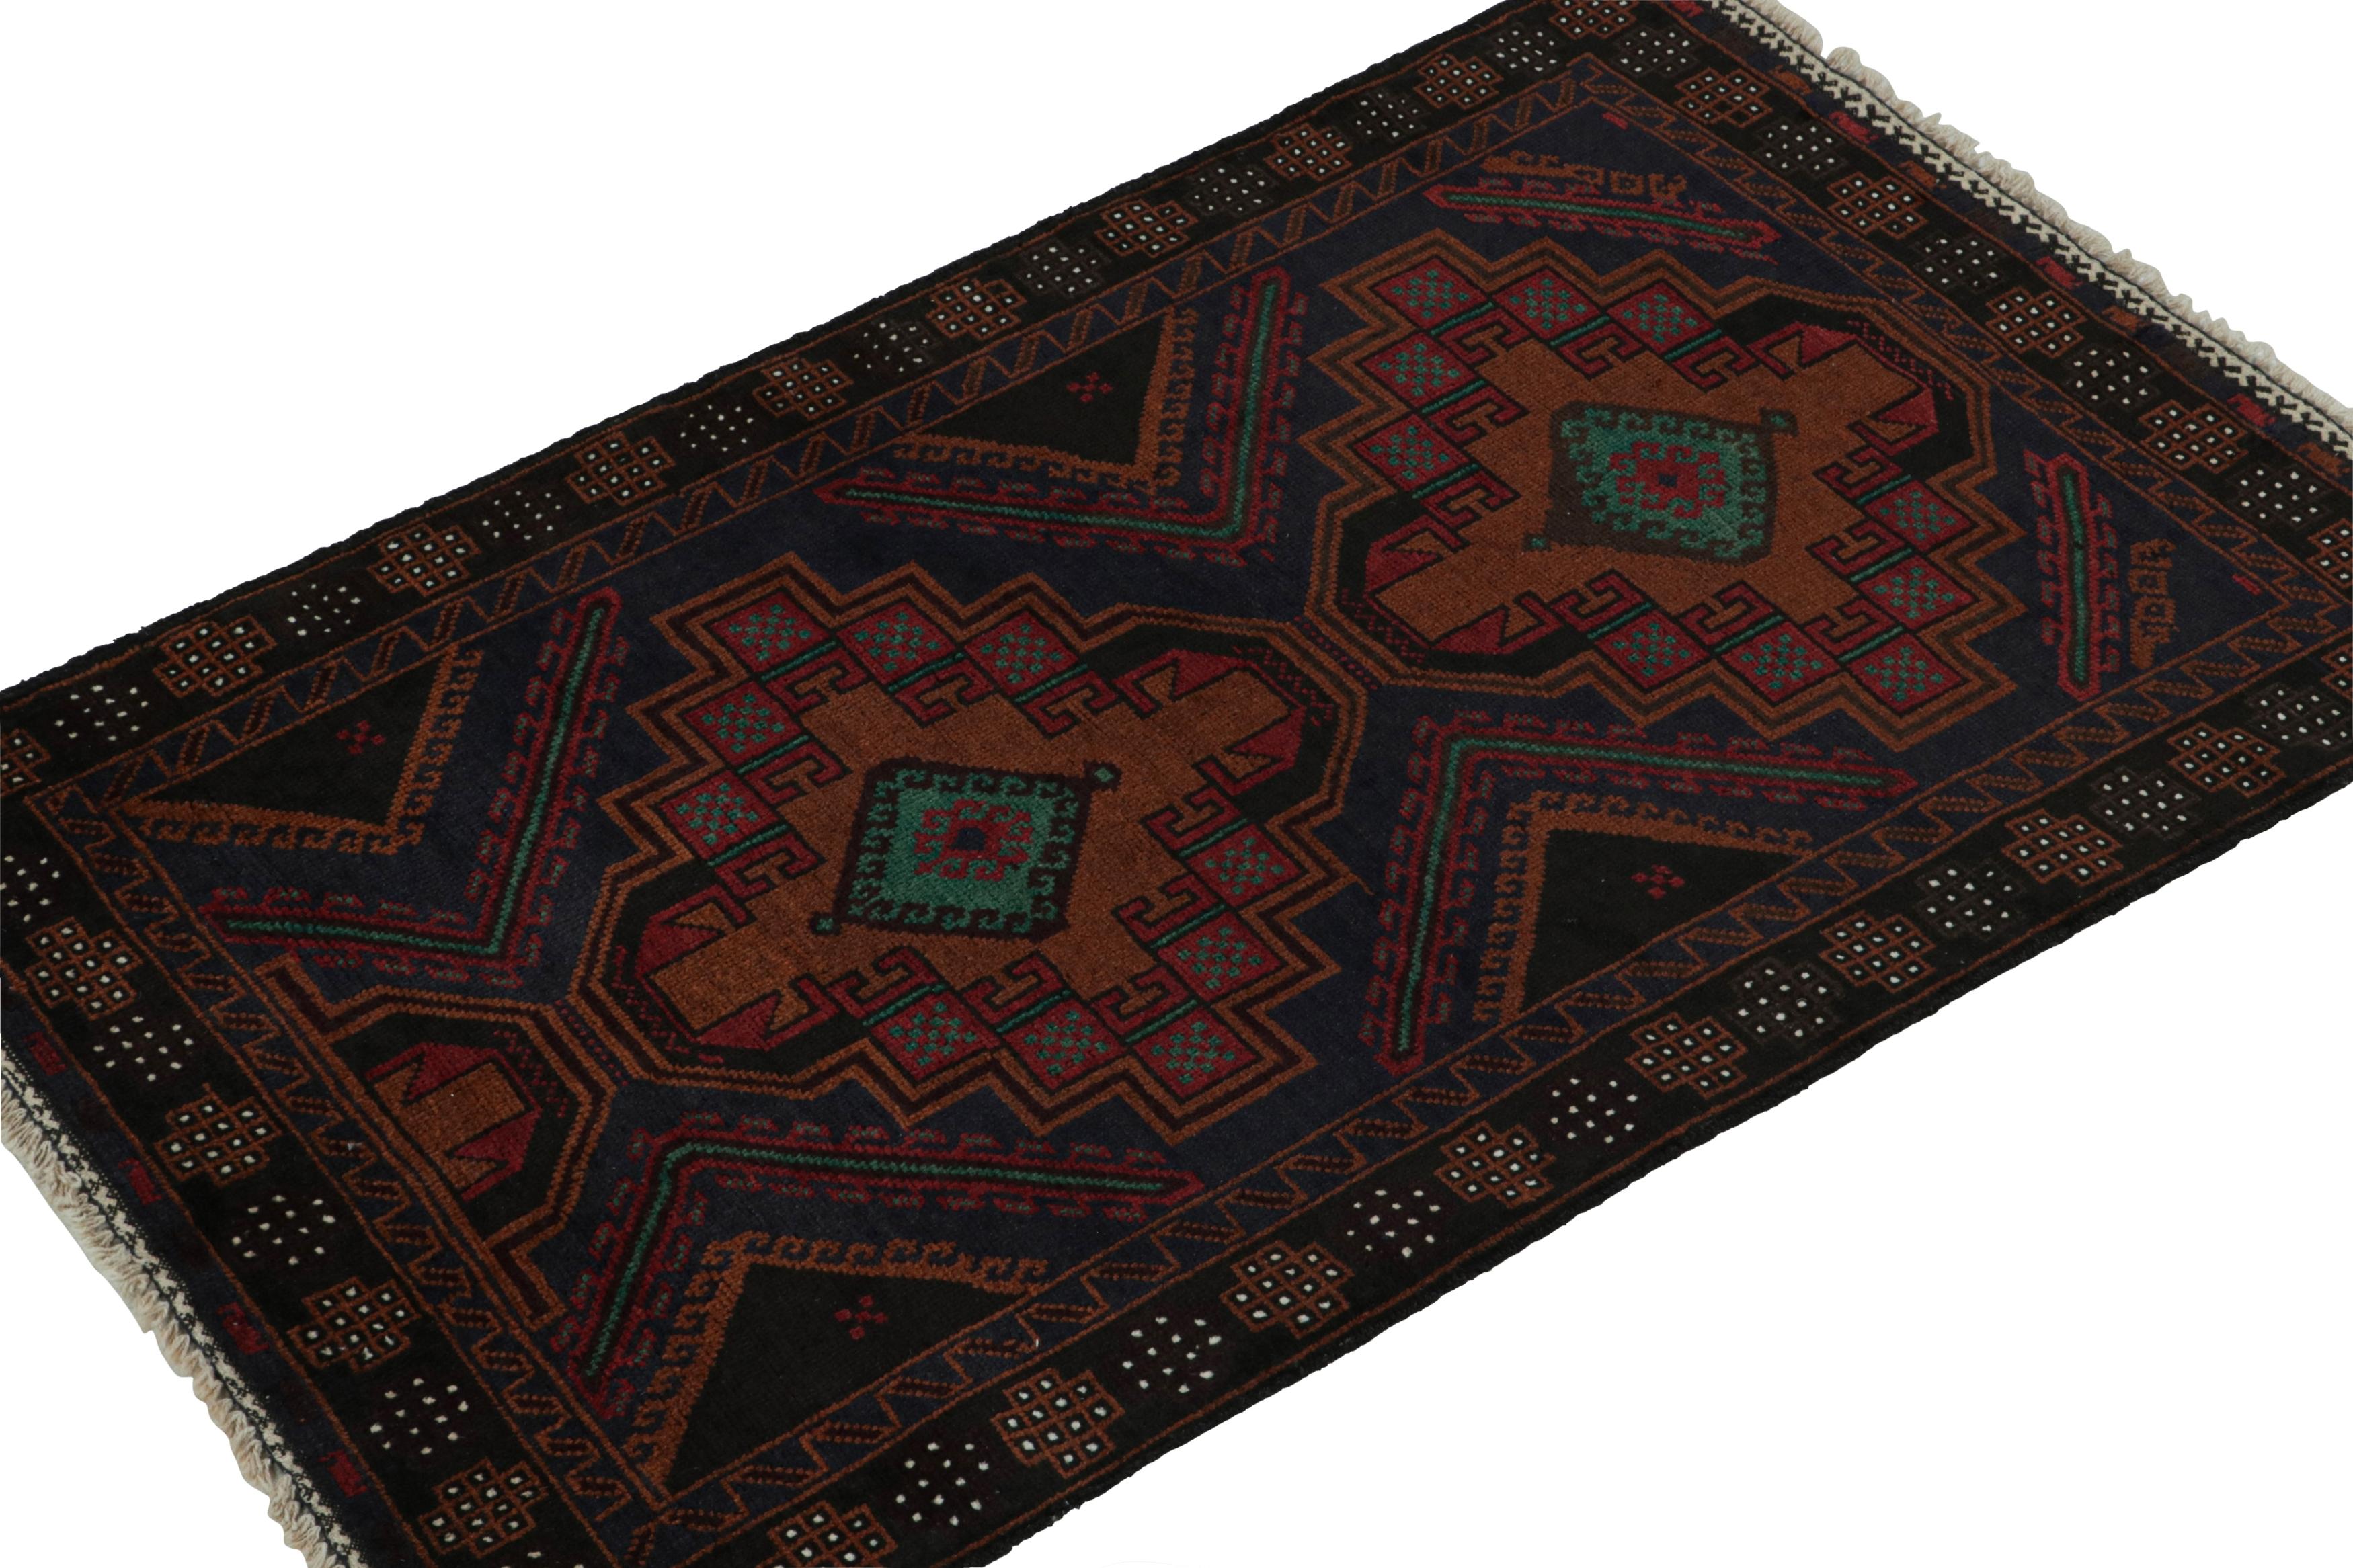 Hand-knotted in wool, this 3x5 Baluch Persian rug of the 1950s is the latest to enter Rug & Kilim’s prestigious Antique & Vintage collection.

On the Design:

The piece enjoys patterns in gold, red & green with impeccable detailing. The field is